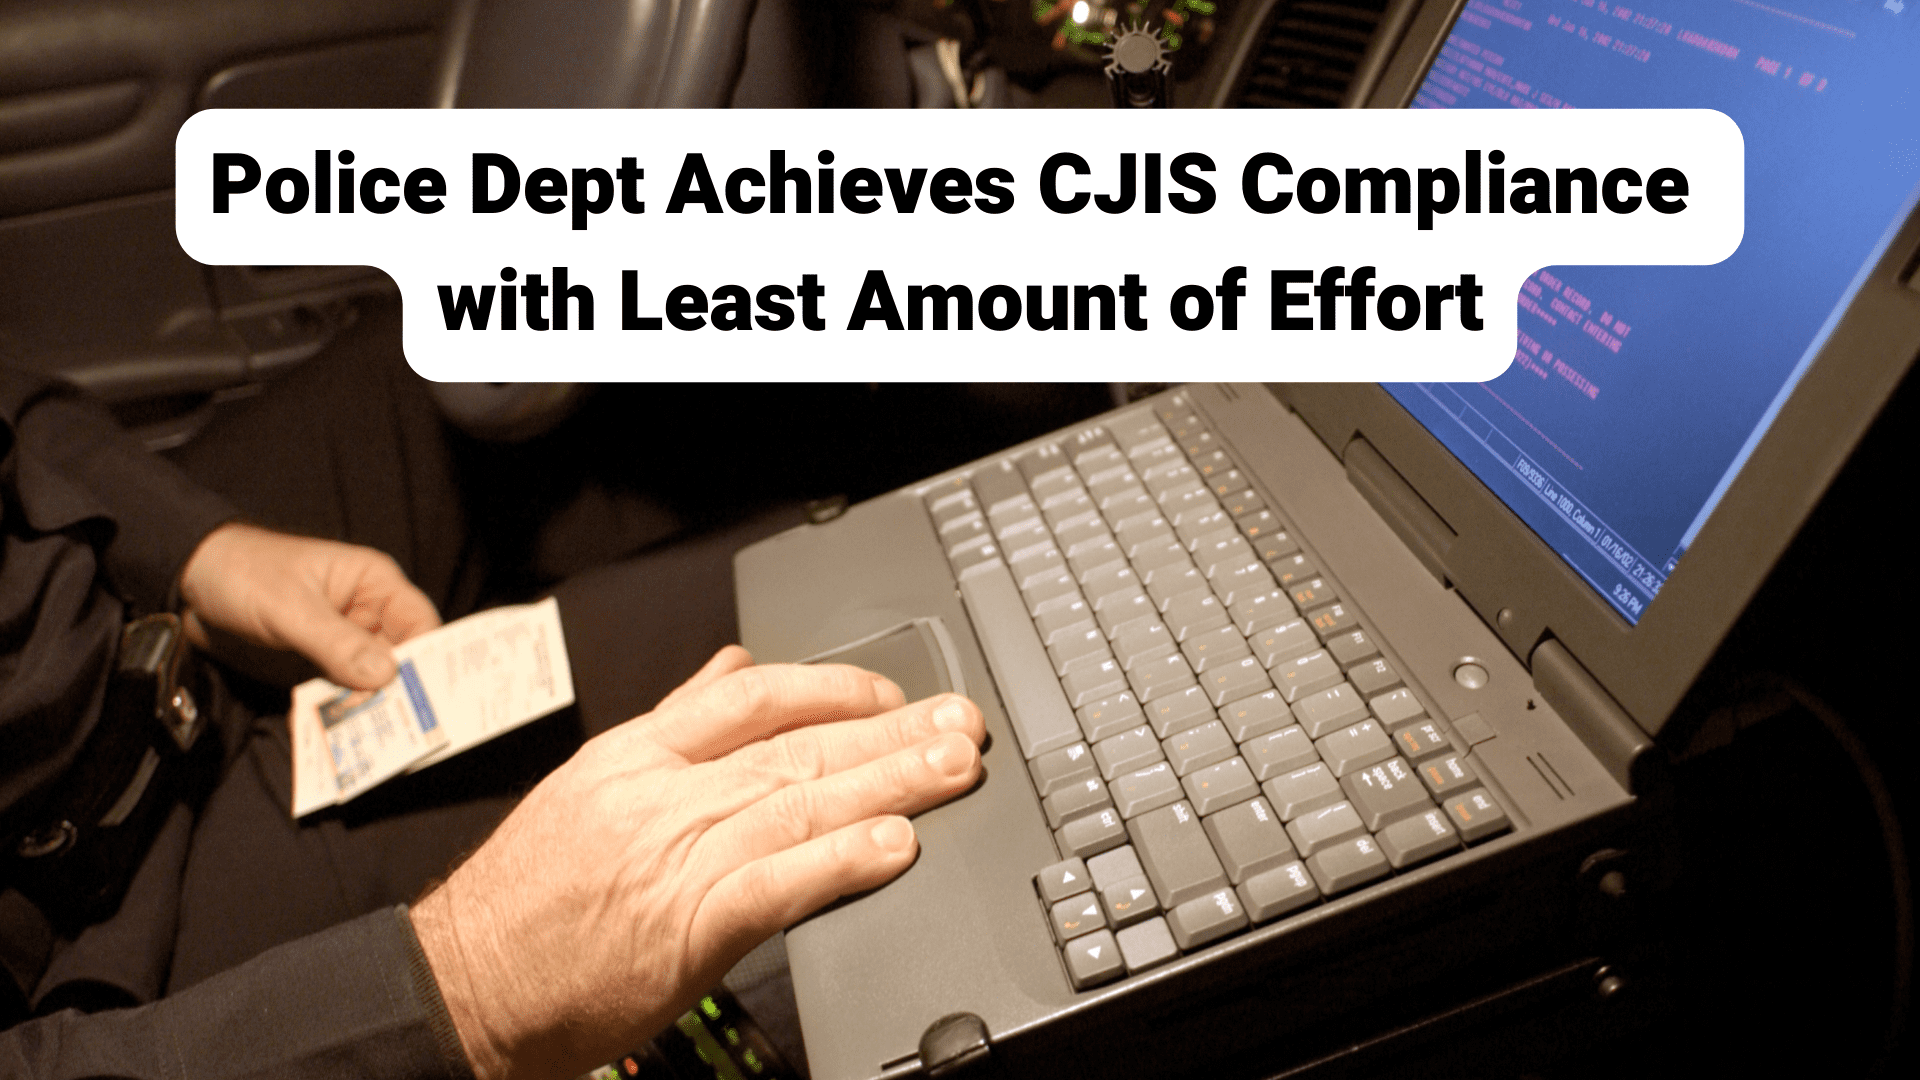 Police Dept Achieves CJIS Compliance with Least Amount of Effort